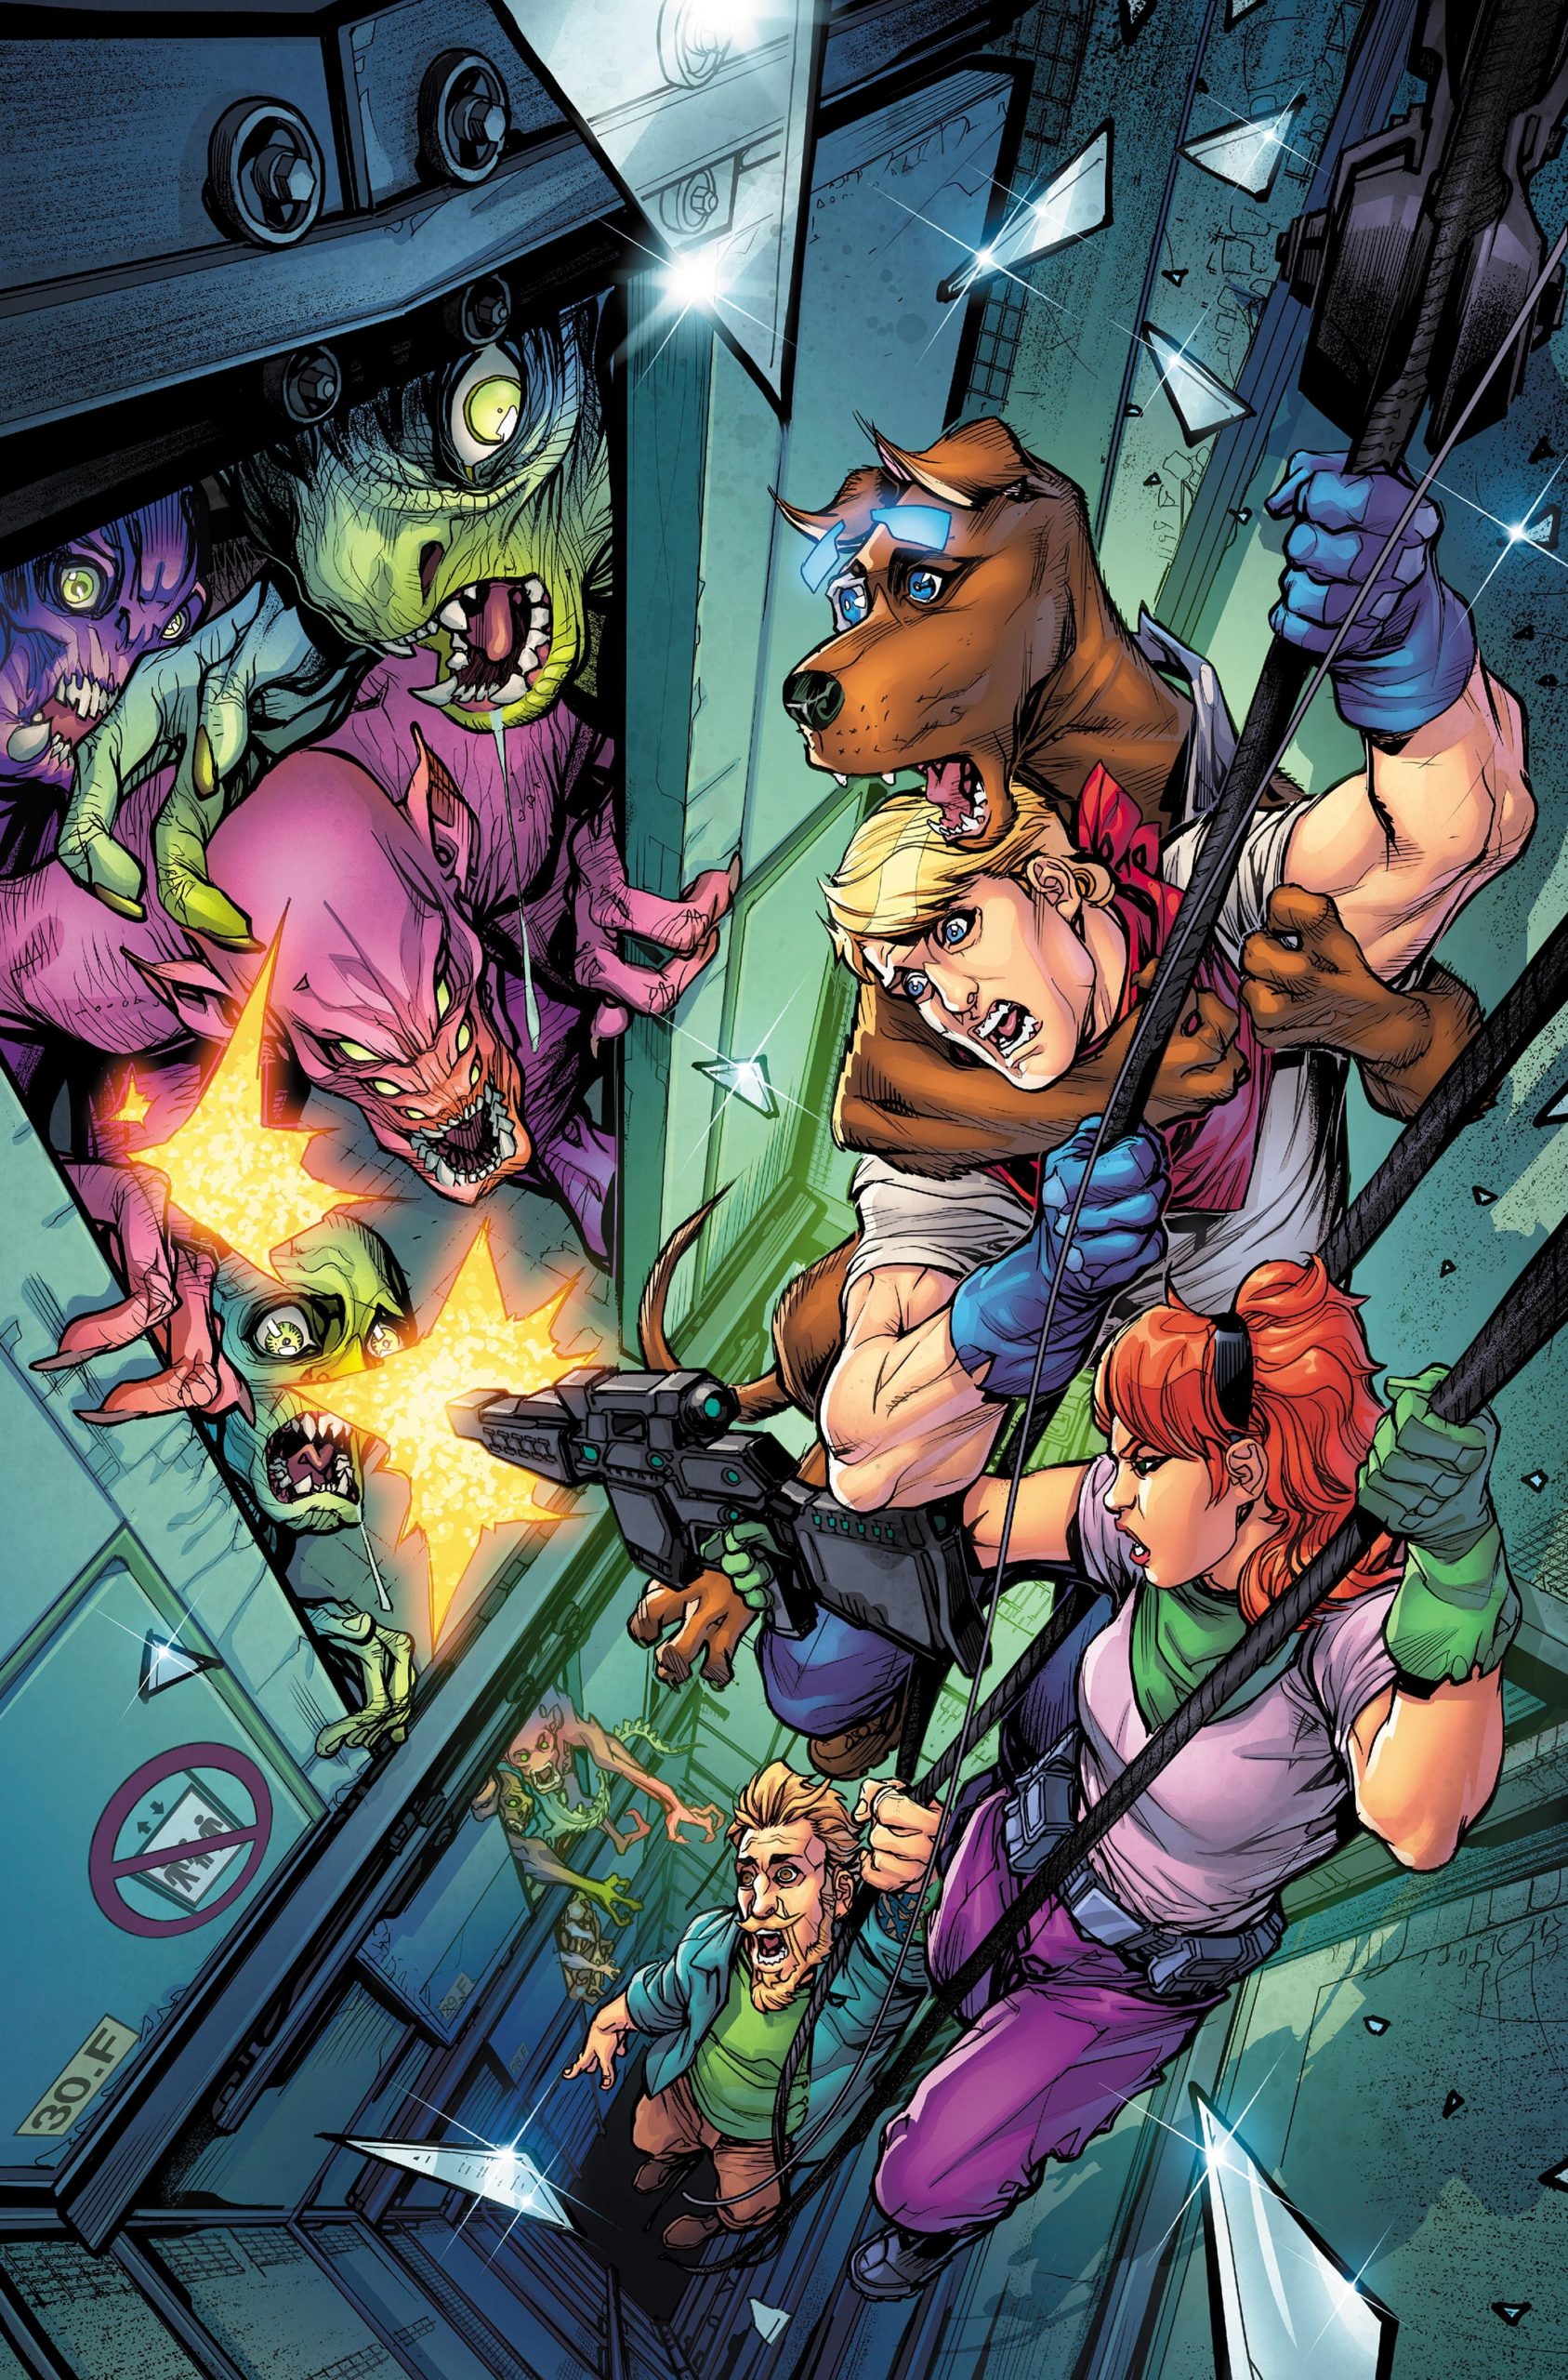 The Scooby Apocalypse #3 Hanna-Barbera Beyond comic cover shows Scooby, Fred, Daphne, and Shaggy dangling from a rope.